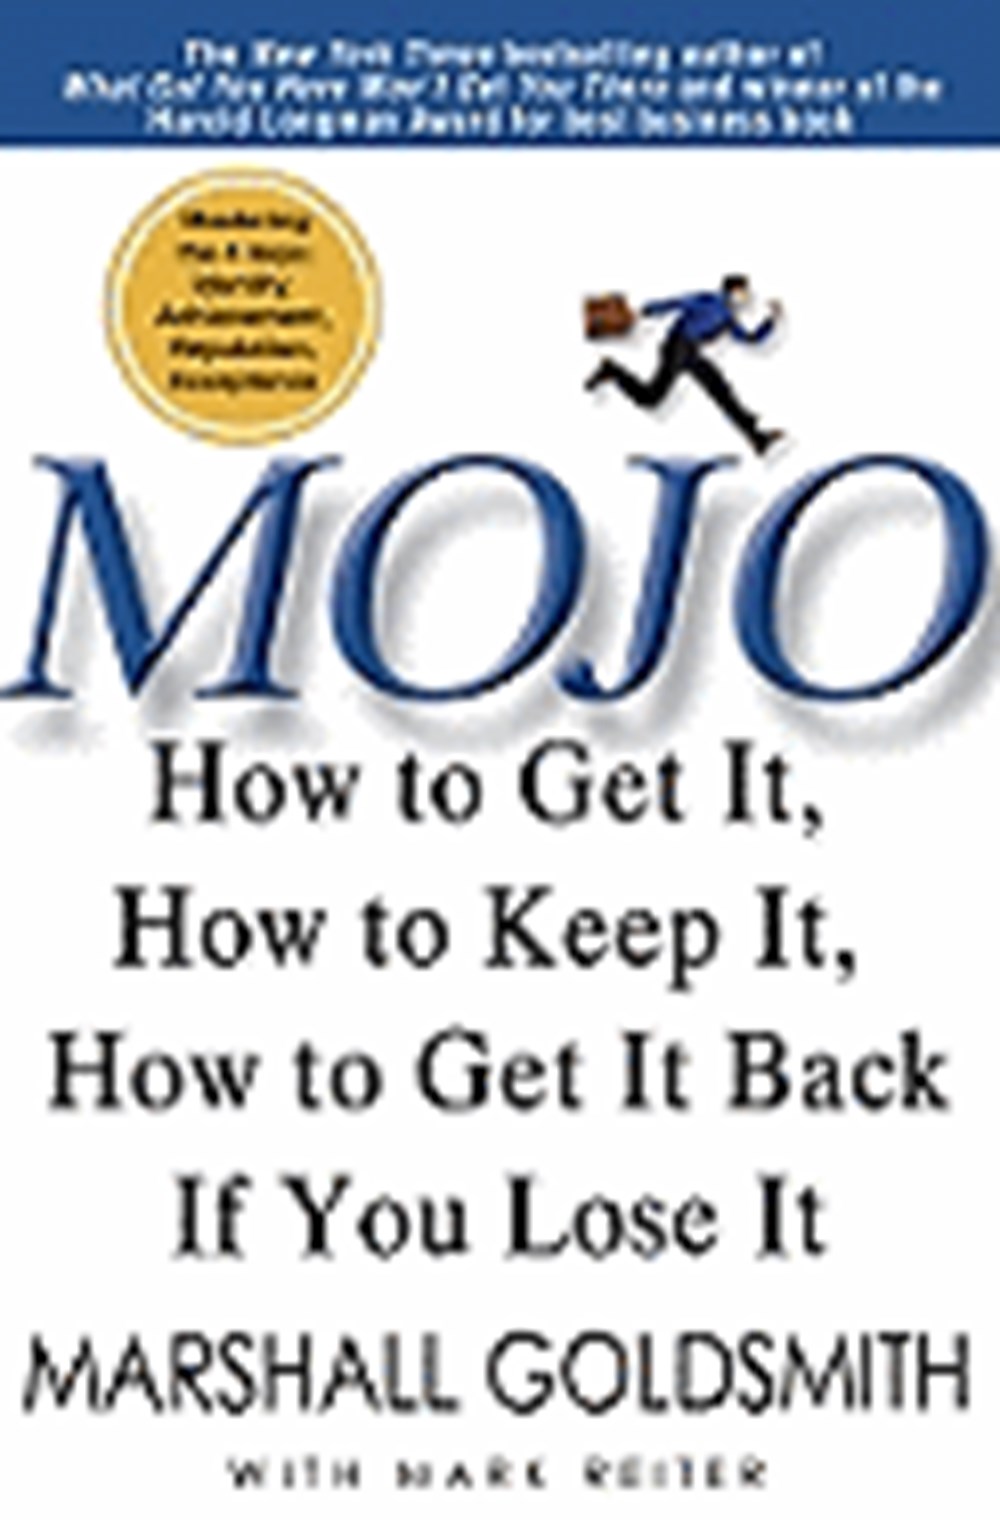 Mojo: How to Get It, How to Keep It, How to Get It Back If You Lose It